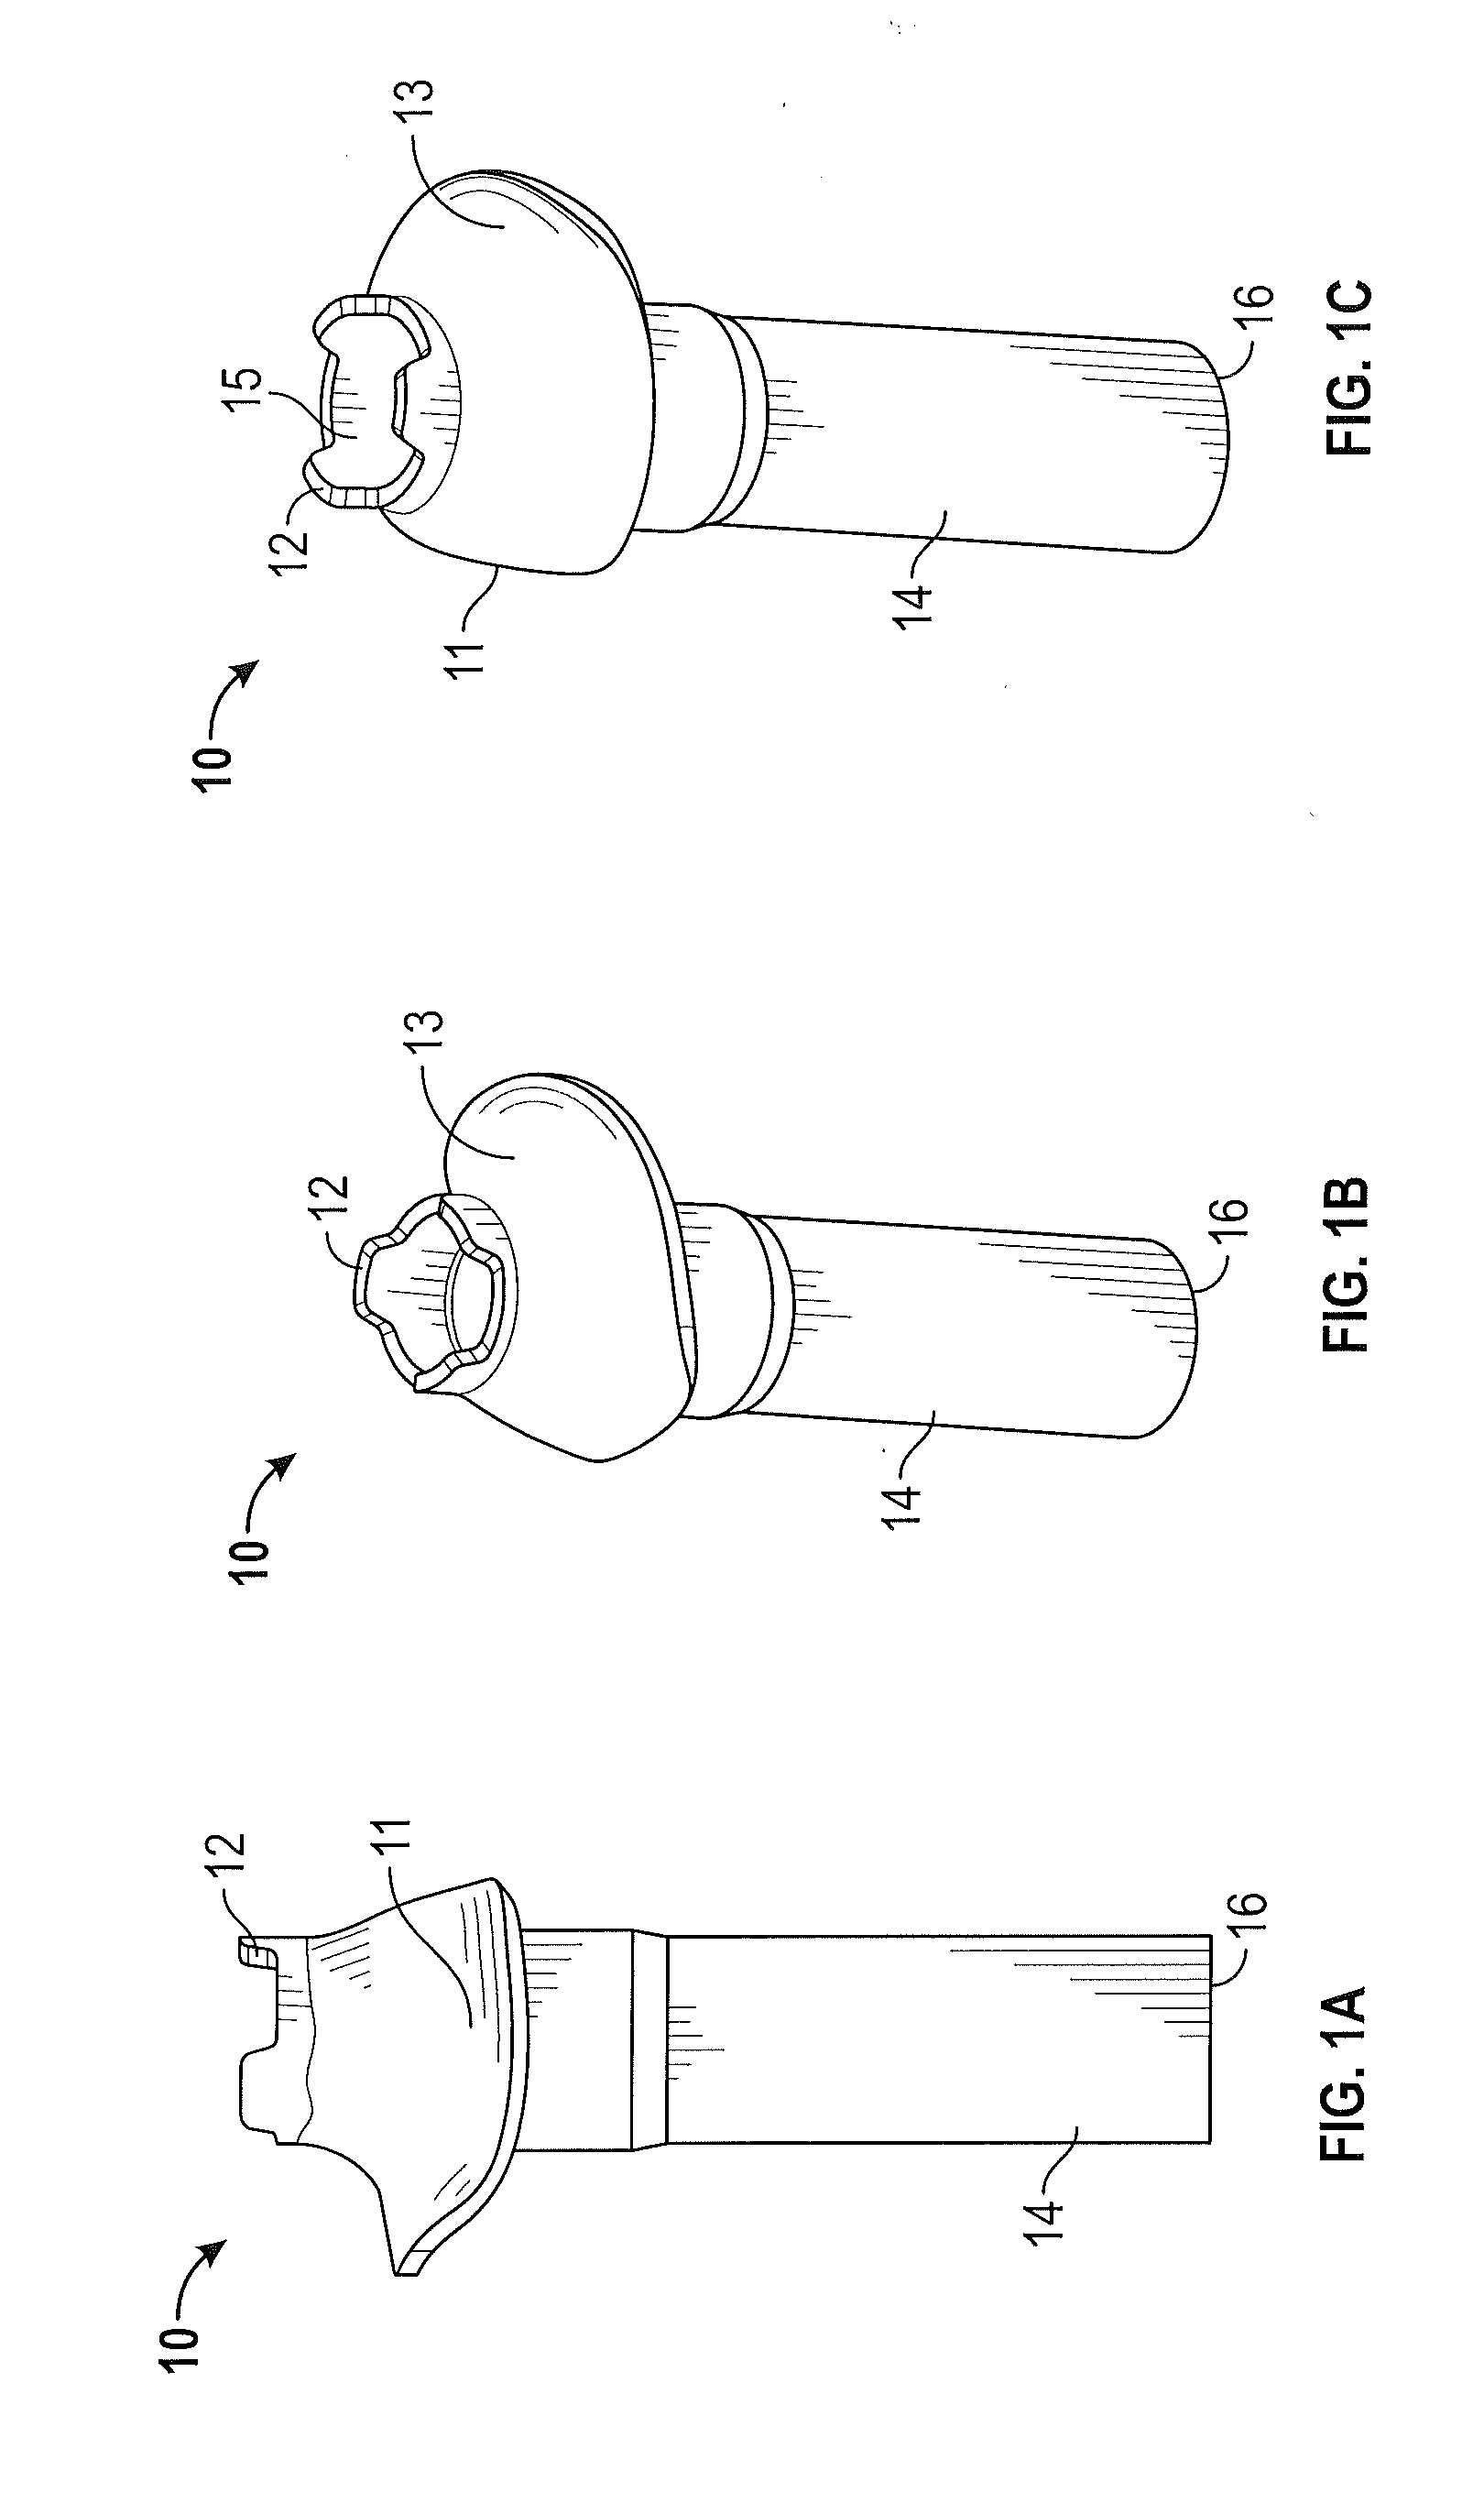 Multi-piece driver with separately cast hosel